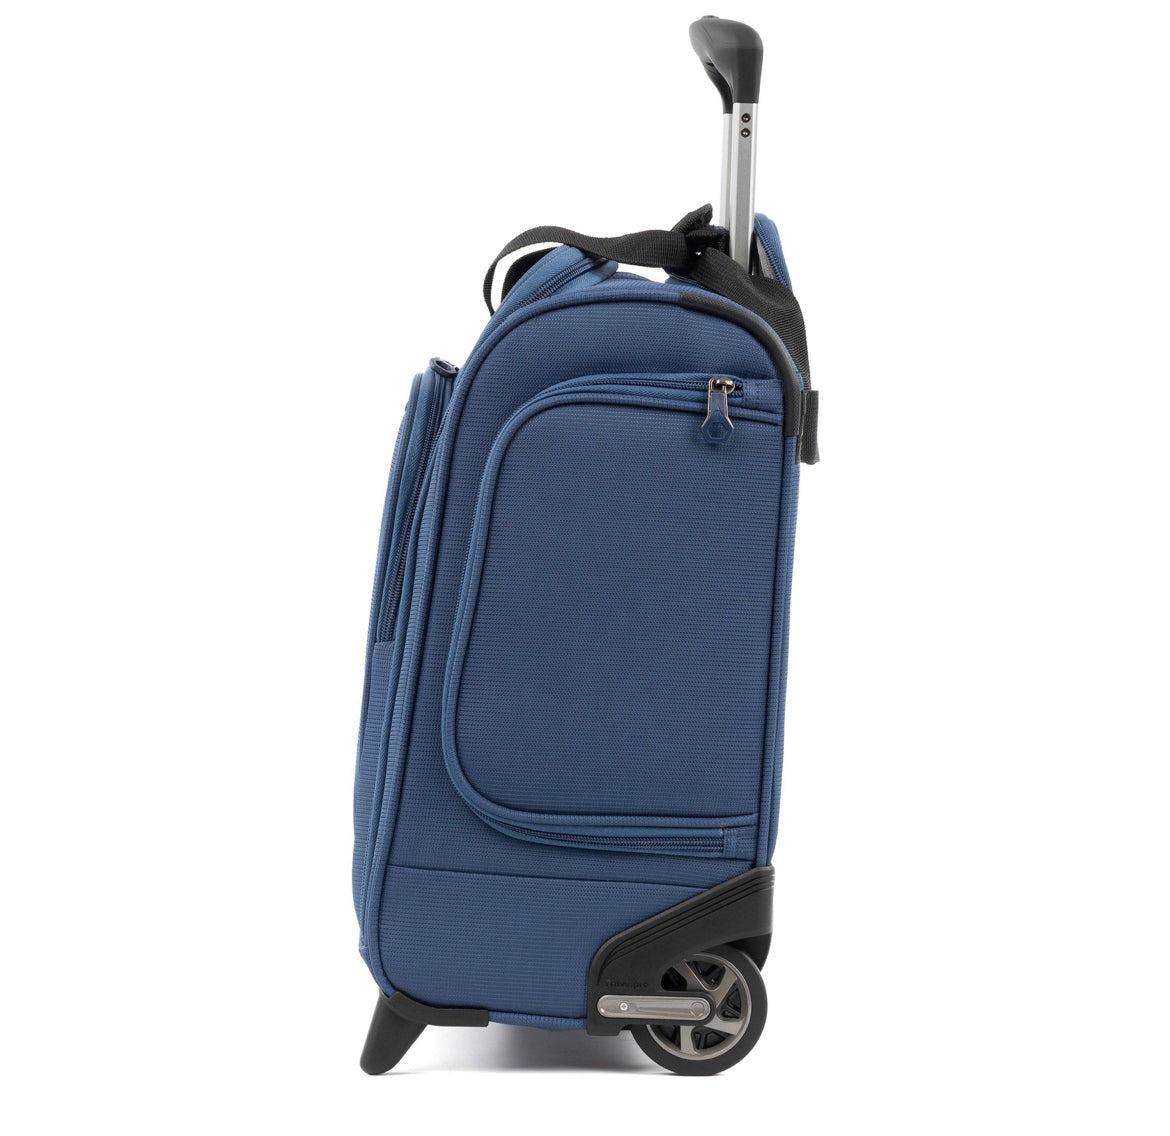 Travelpro 2-Wheeled TourLite Softsided Underseat Carry-On- TP8008S77